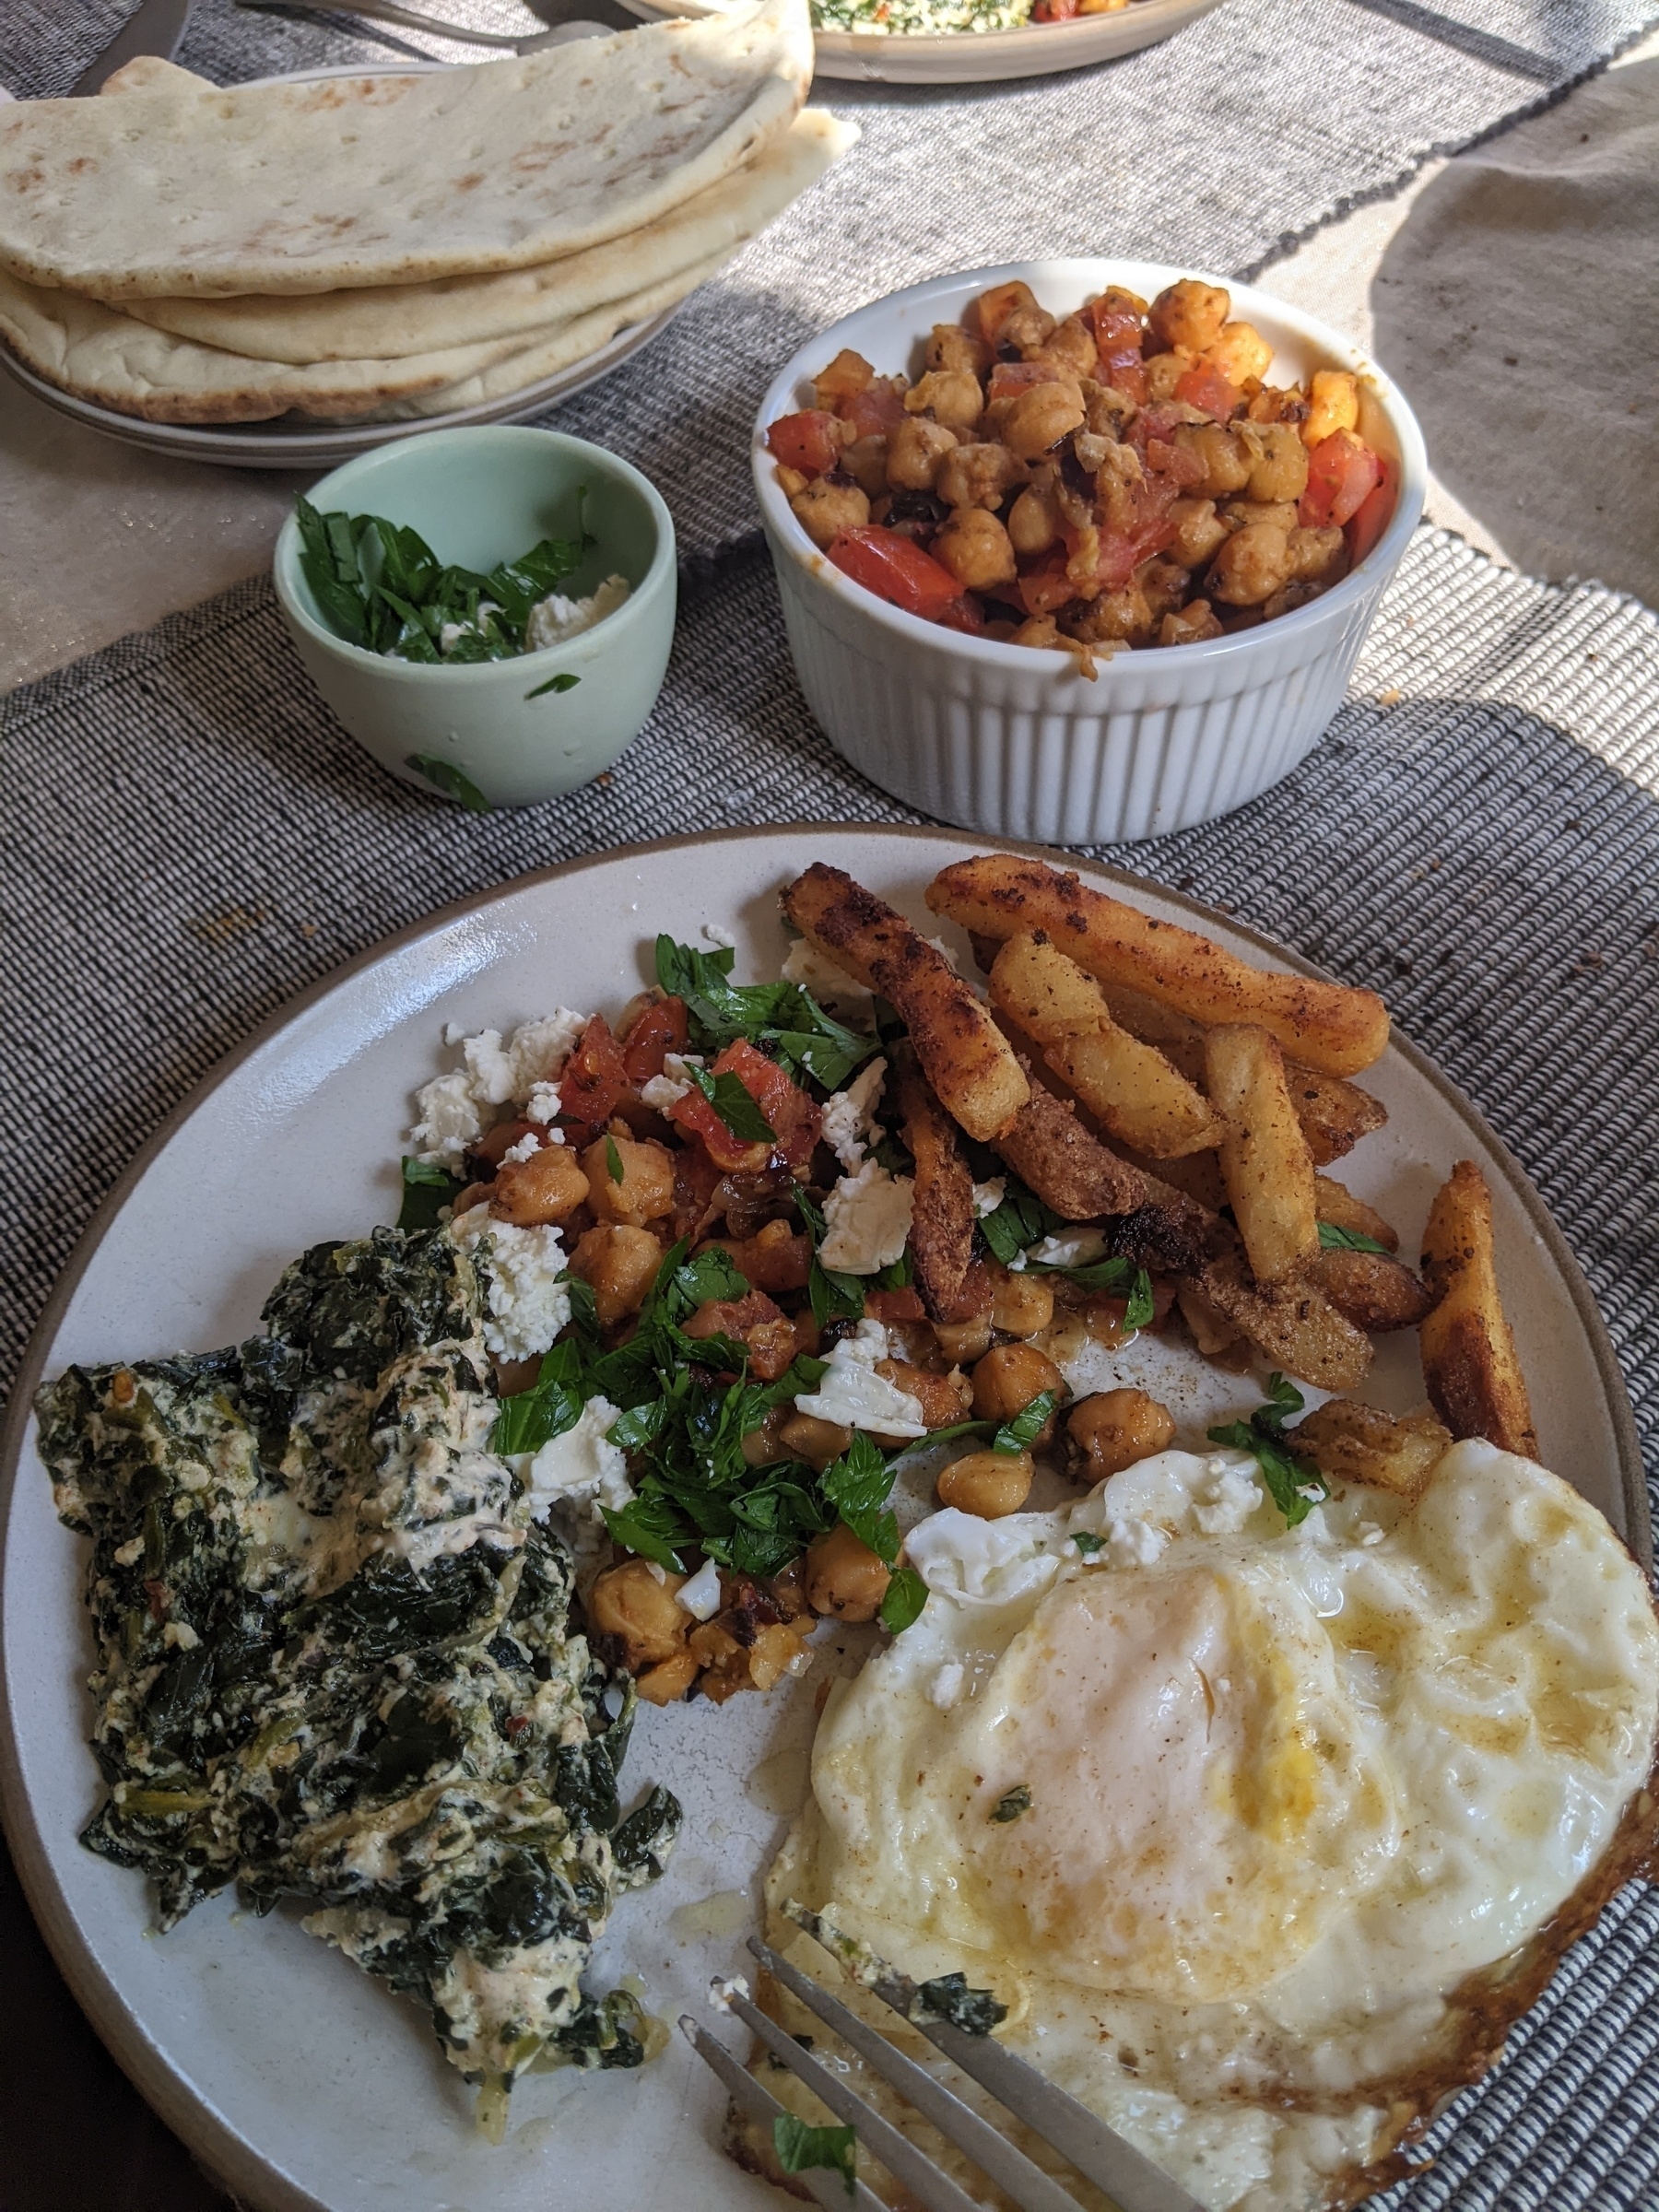 Plate with fried egg, chickpeas topped with feta and parsley, spinach and cream, and refried French fries beside a plate of pita bread 